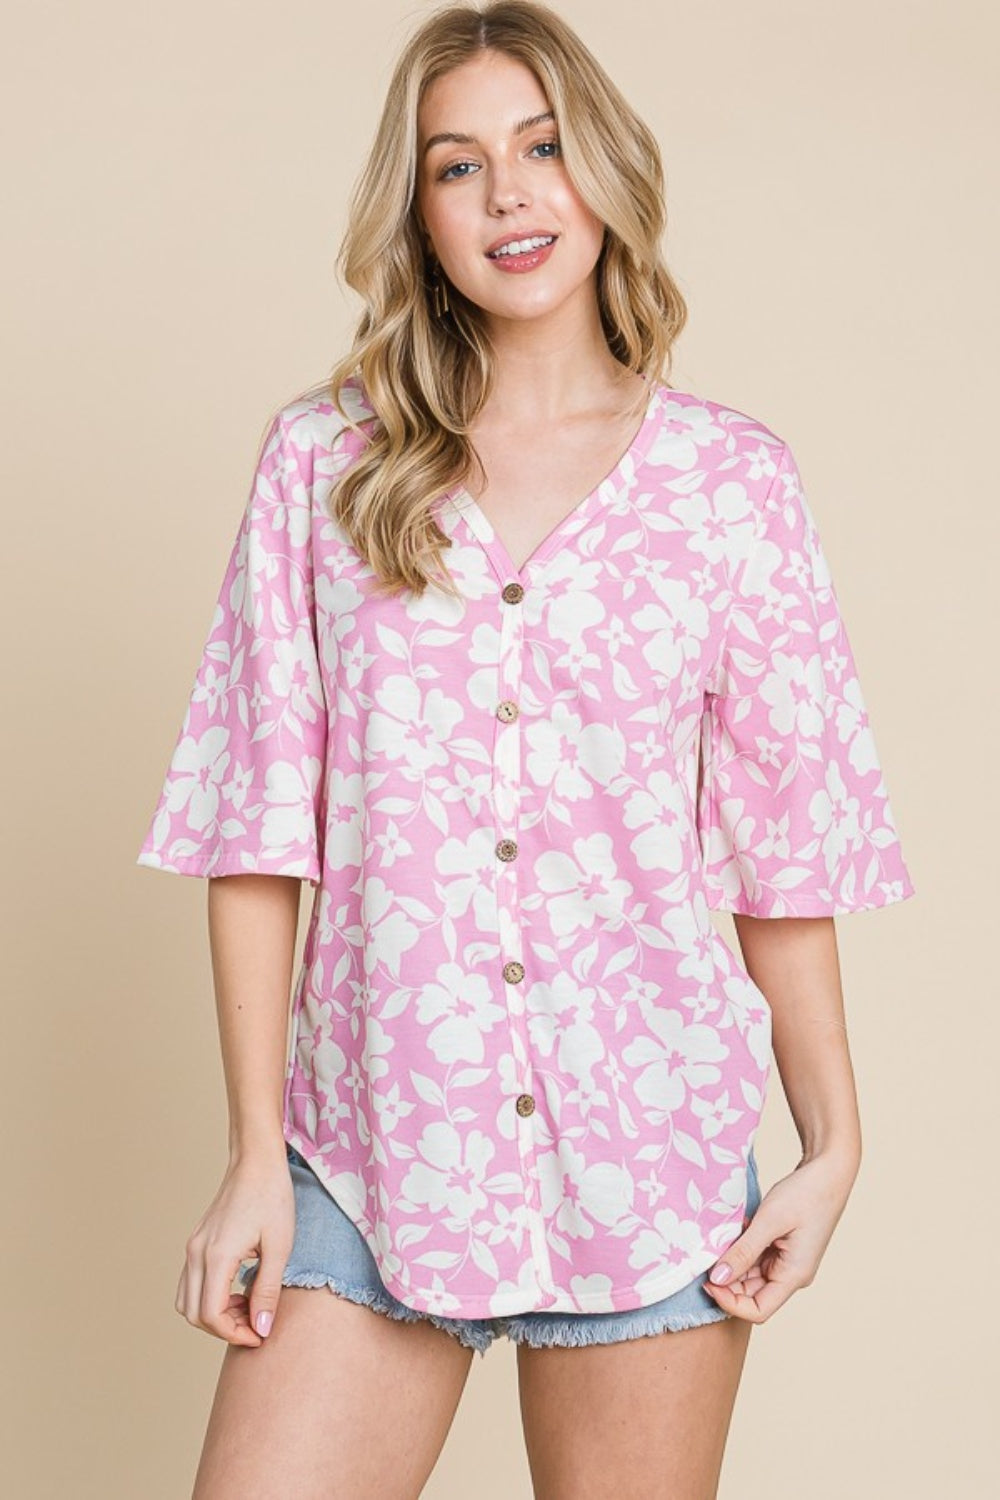 Spring To Life Floral Top